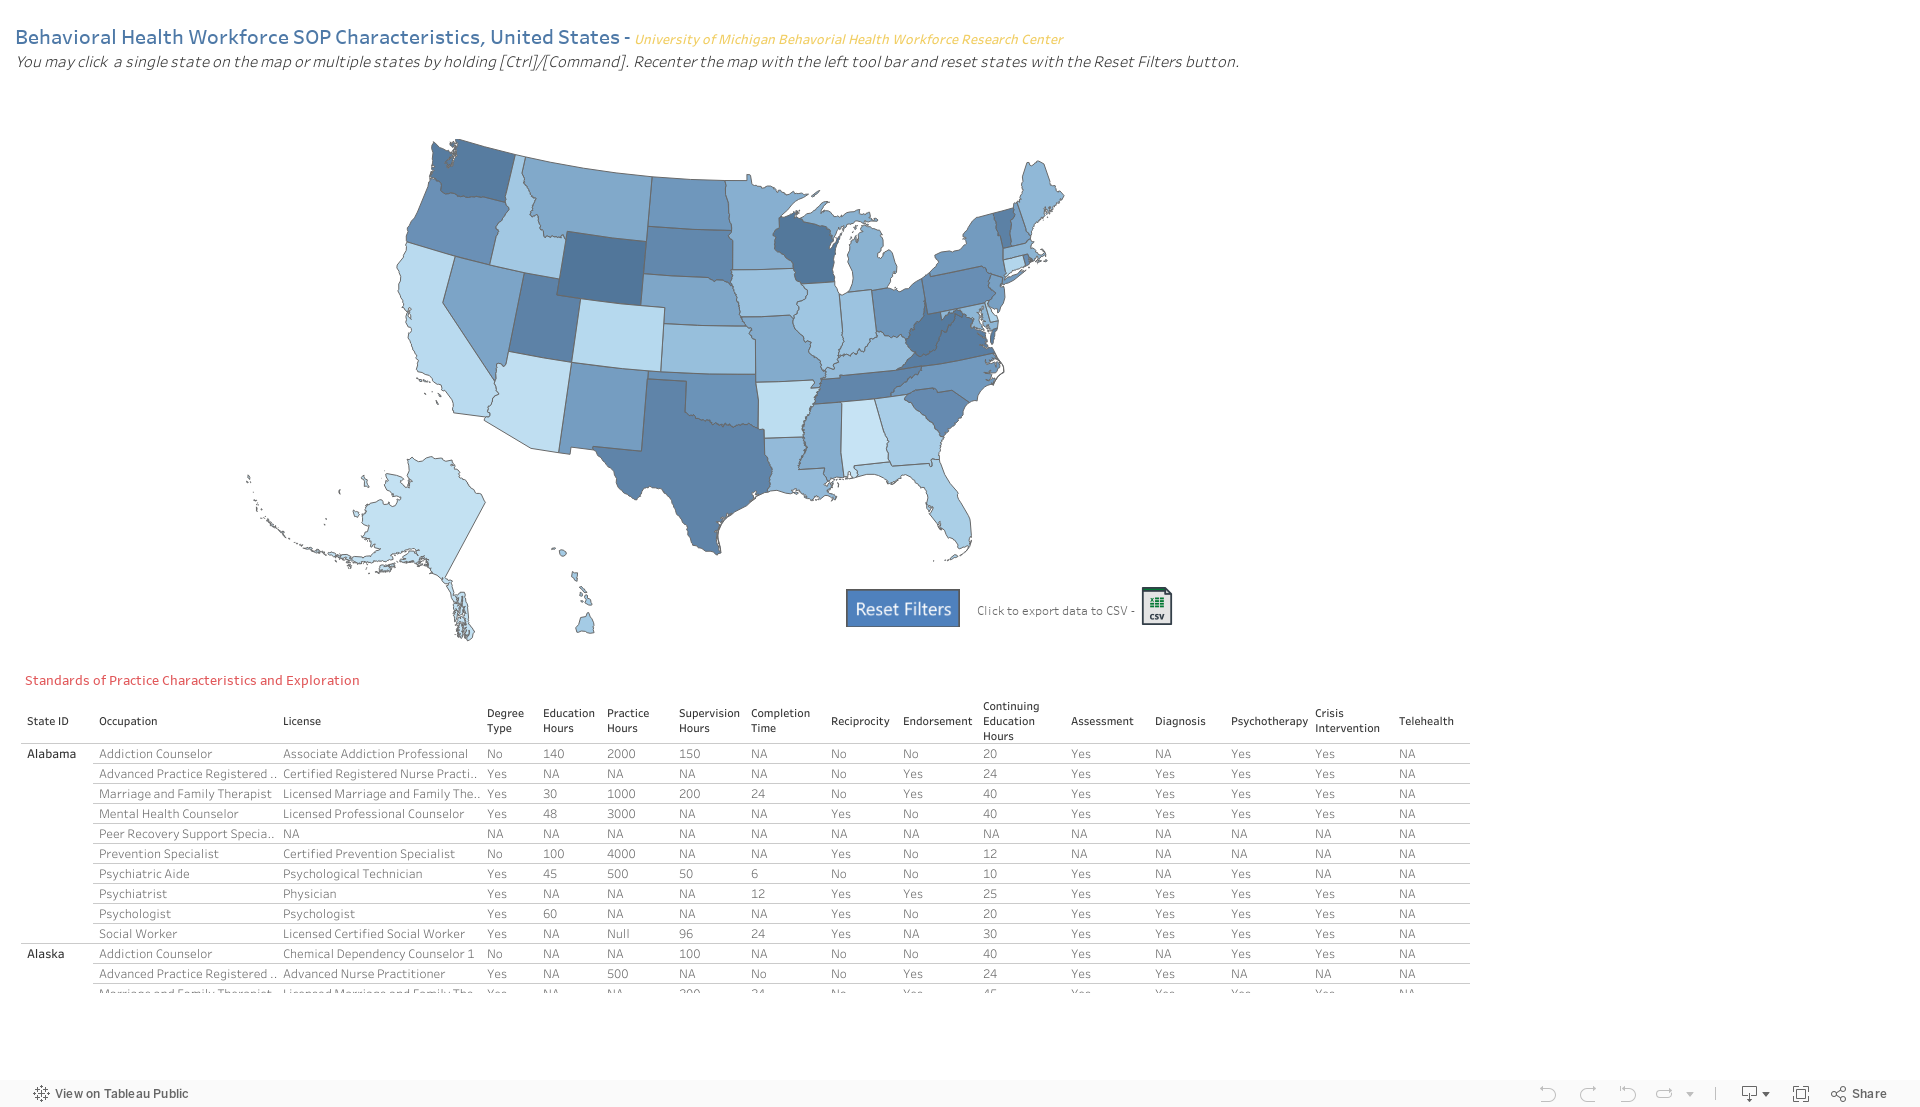 United States Behavioral Workforce Licensure Exploration - University of Michigan Behavorial Health Workforce Research CenterYou may click a single state on the map or multiple states by holding [Ctrl]. Recenter the map with the left tool bar and reset 